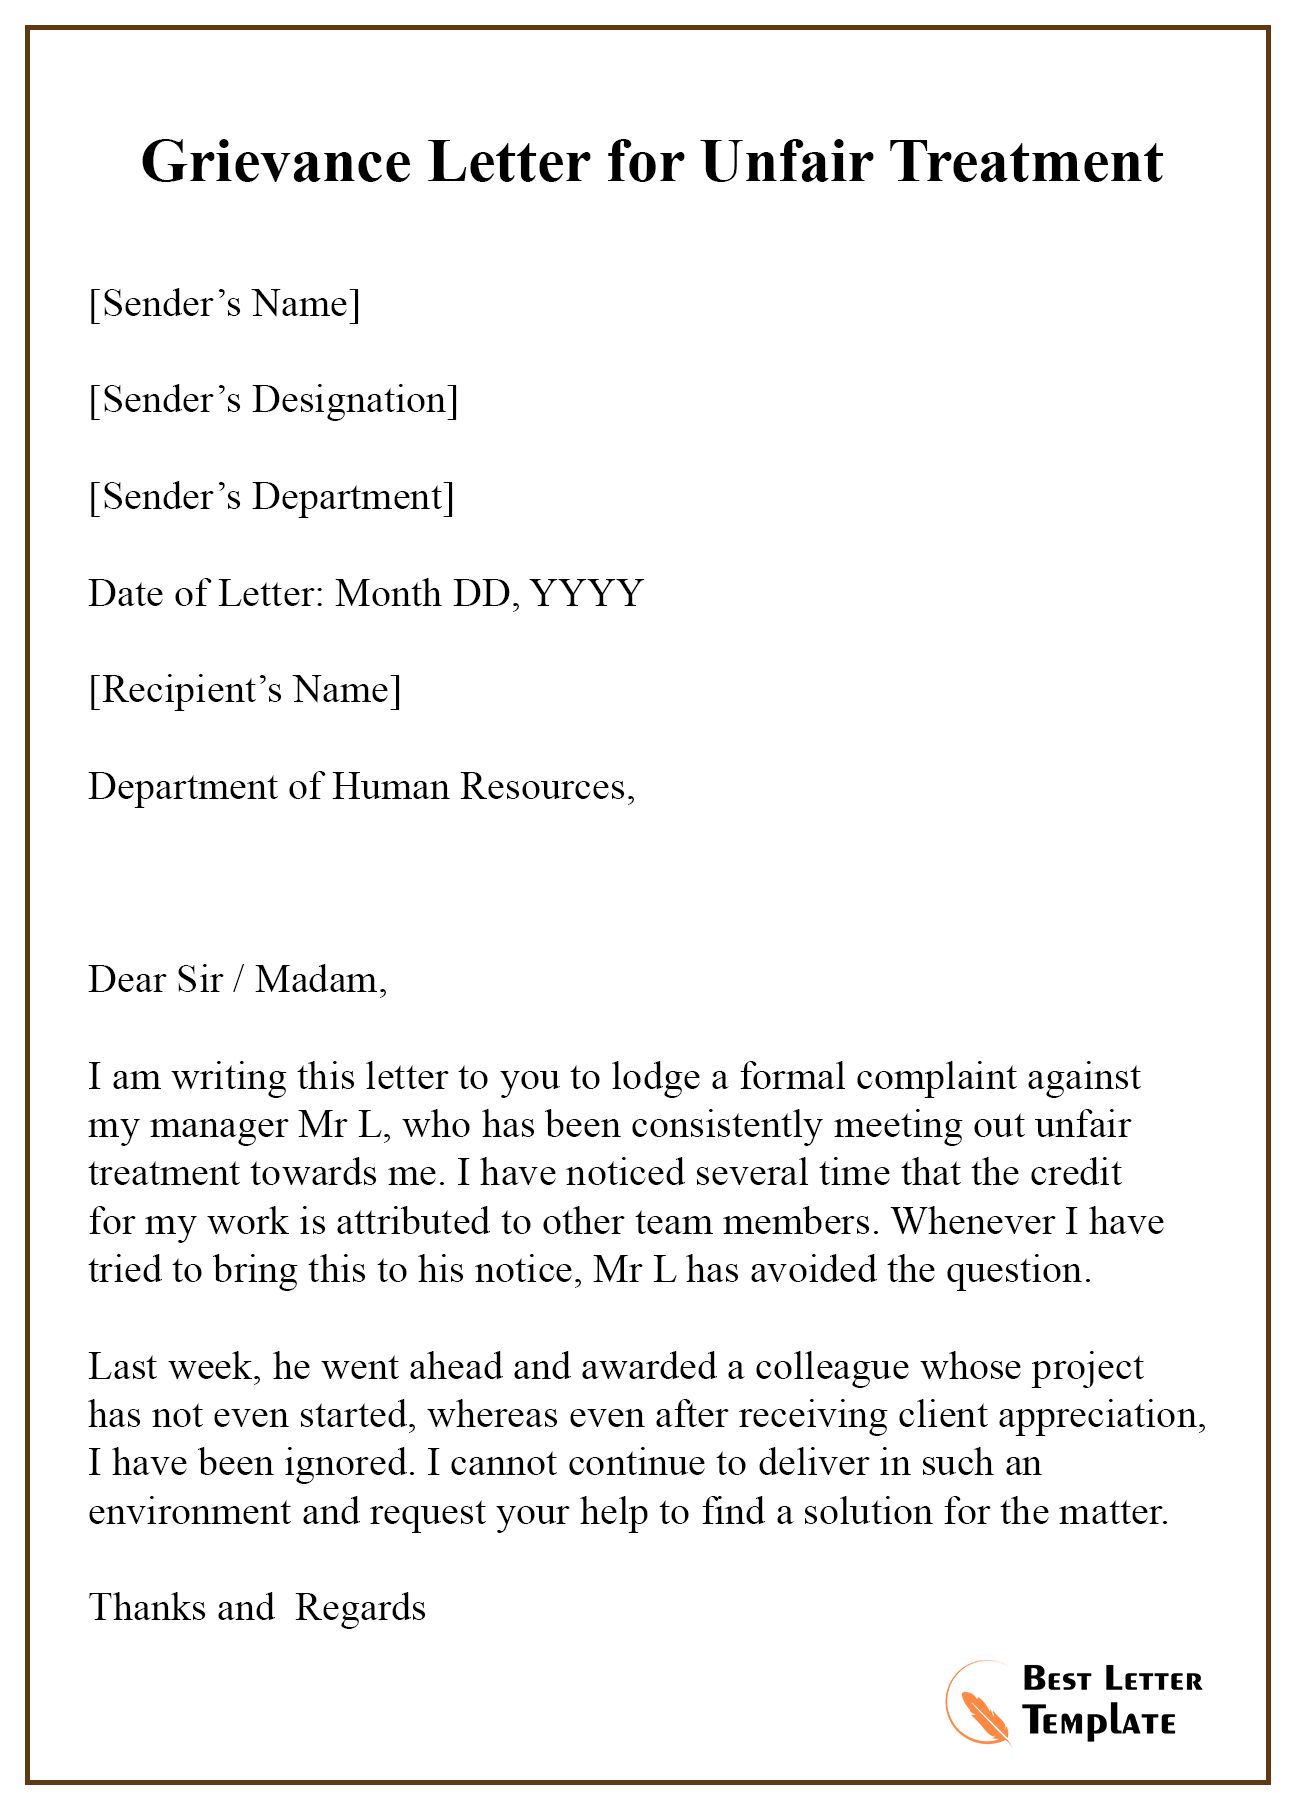 Writing A Grievance Letter from bestlettertemplate.com